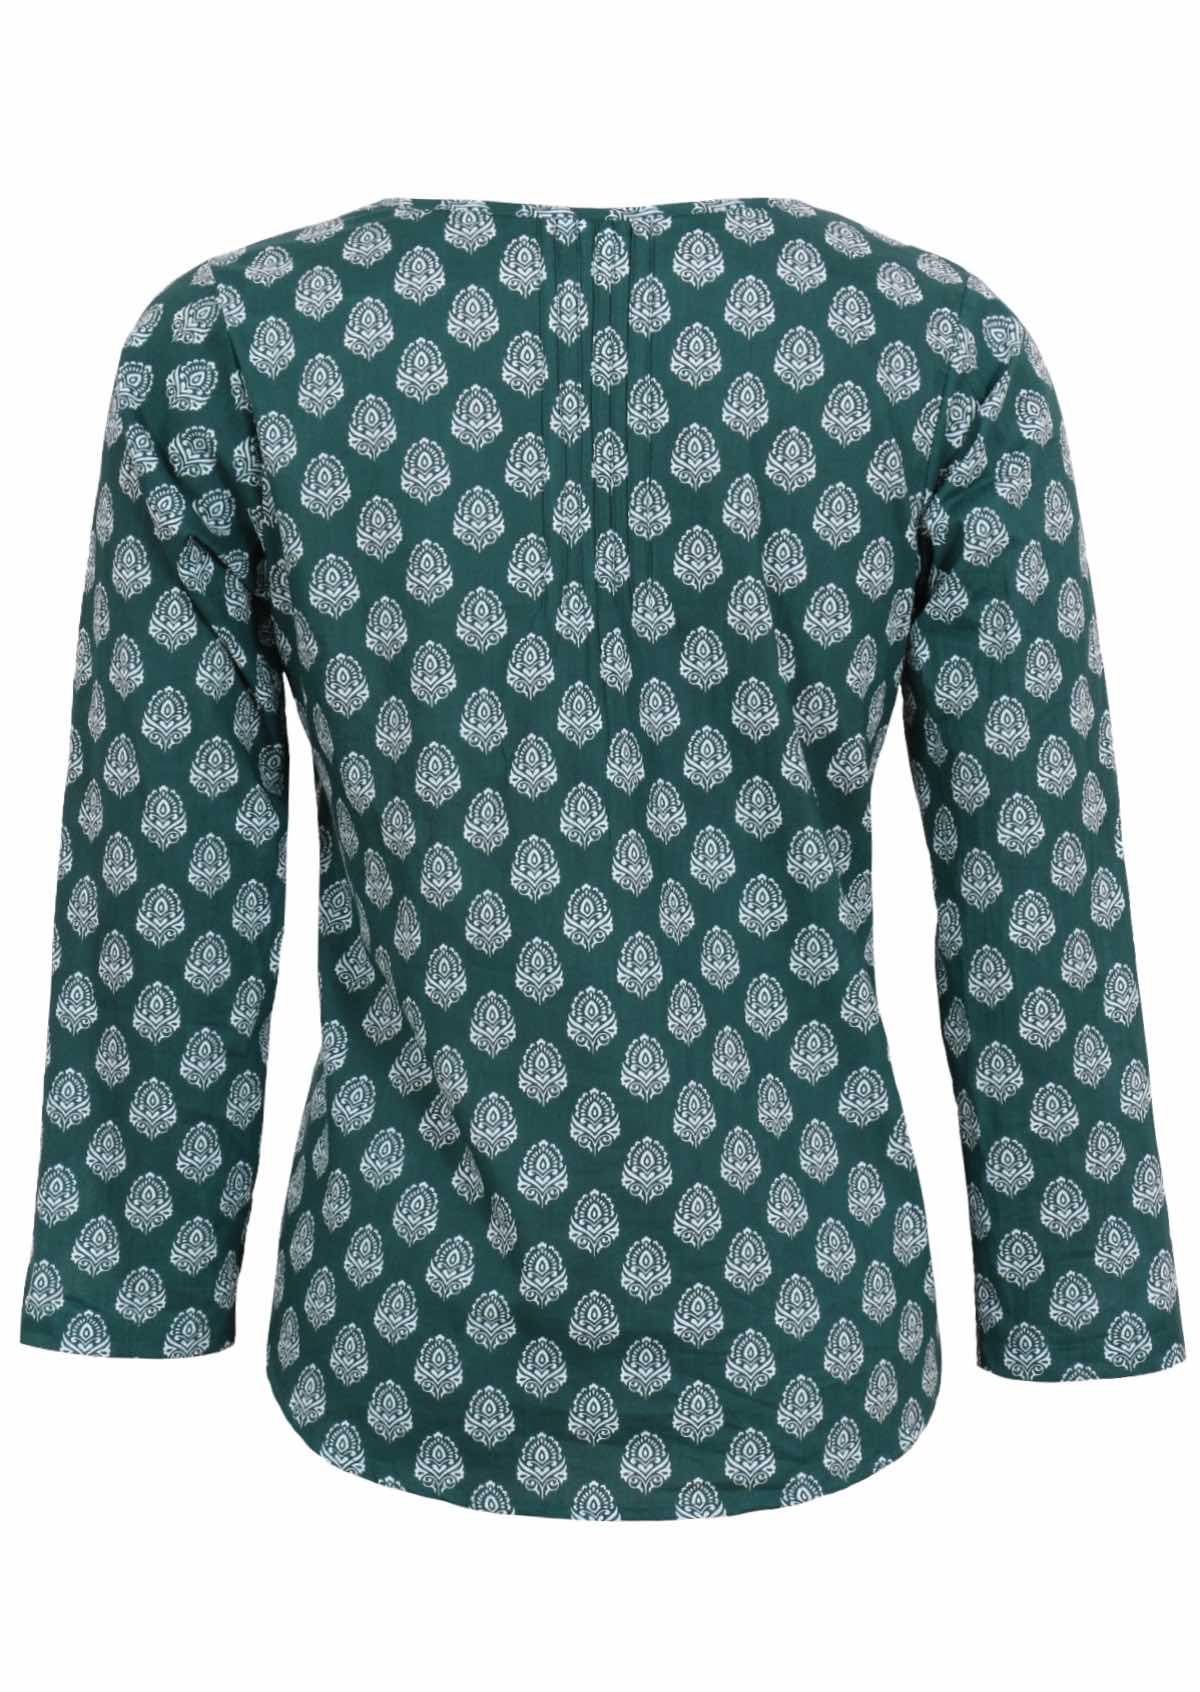 100% cotton long sleeve top in gorgeous green